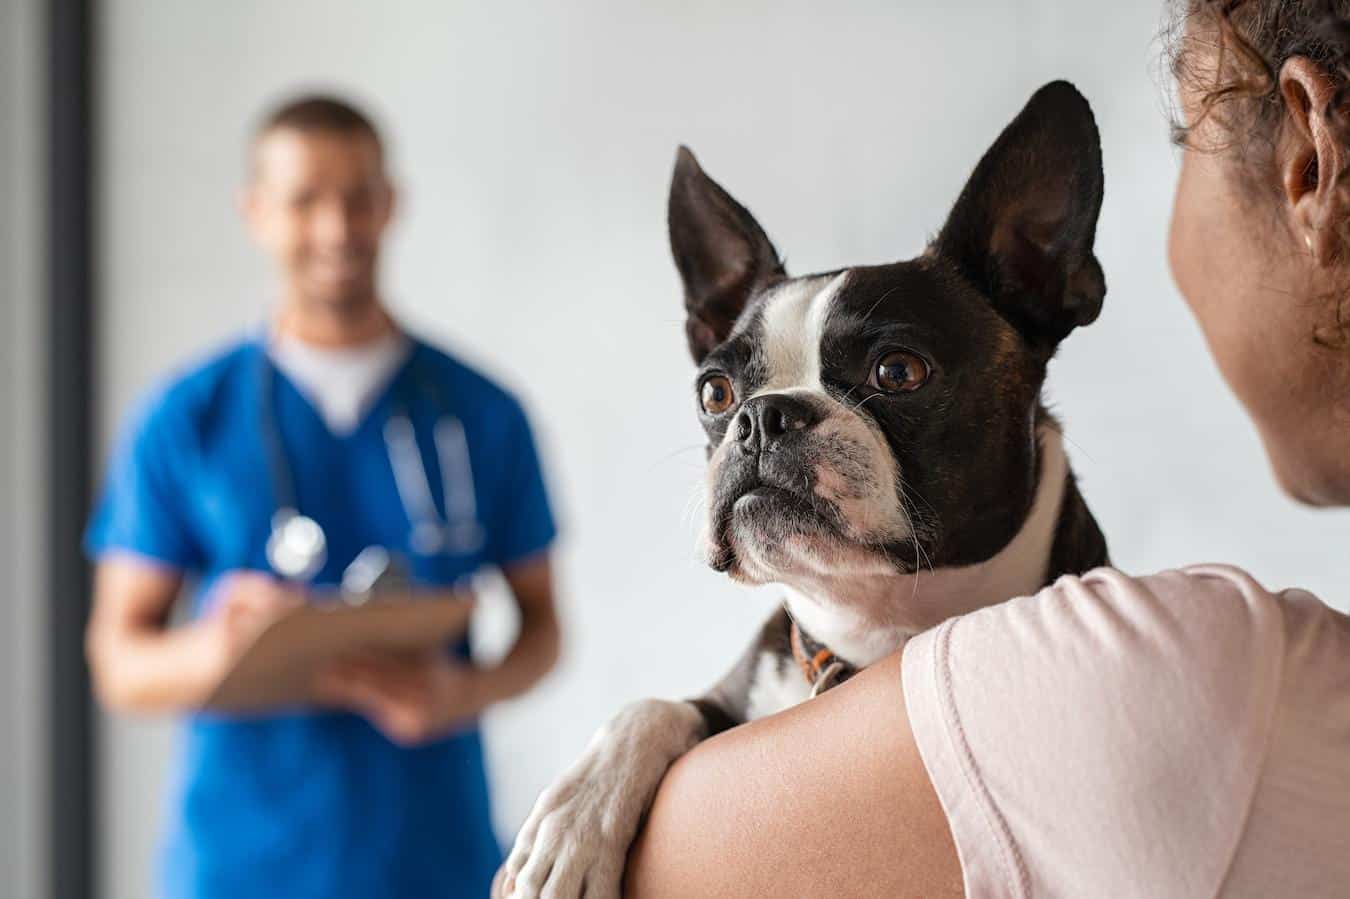 a dog being carried by a person at the vet excessive dog panting in dogs pant dog's breathing dog panting abnormal dog's normal respiratory rate recognize abnormal breathing too much cortisol engaging stomach muscles